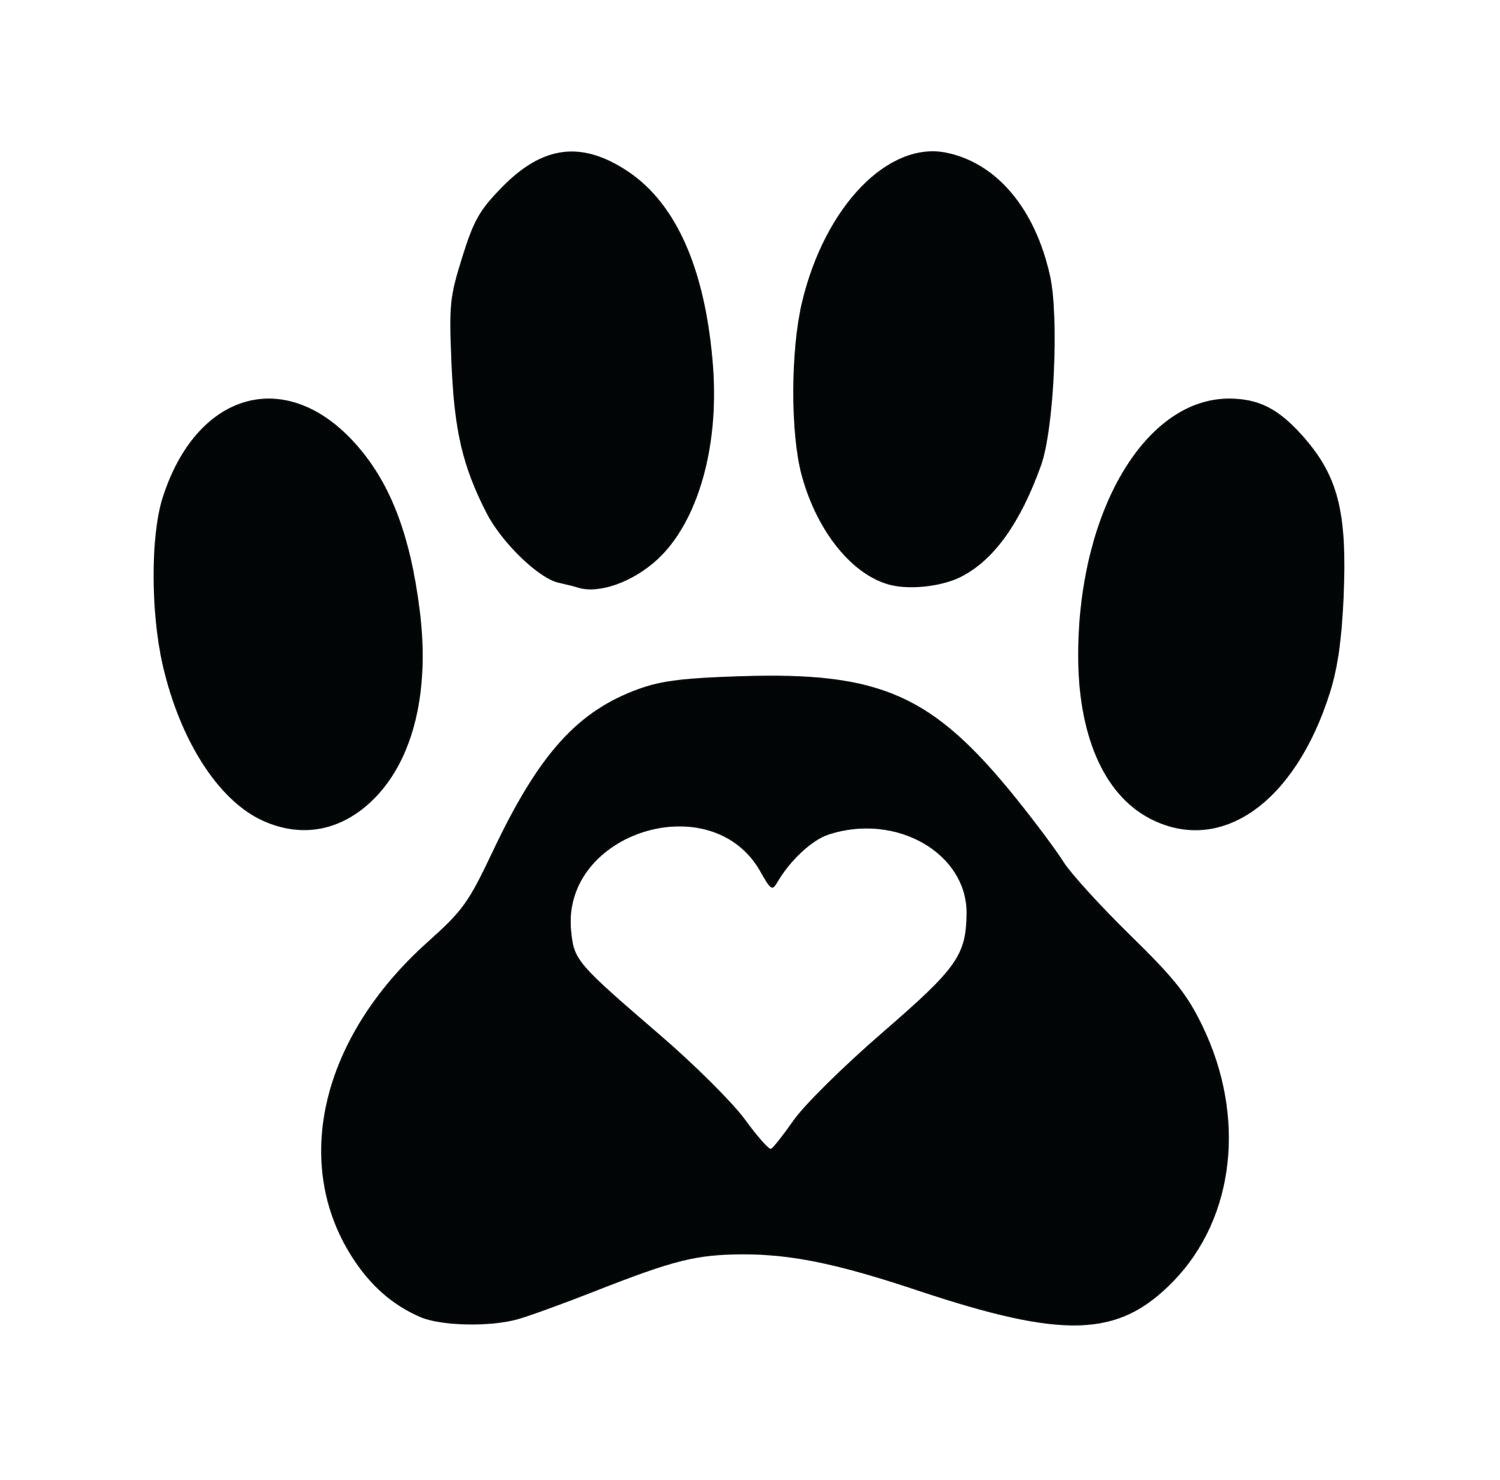 paw-print-black-free-download-on-clipartmag